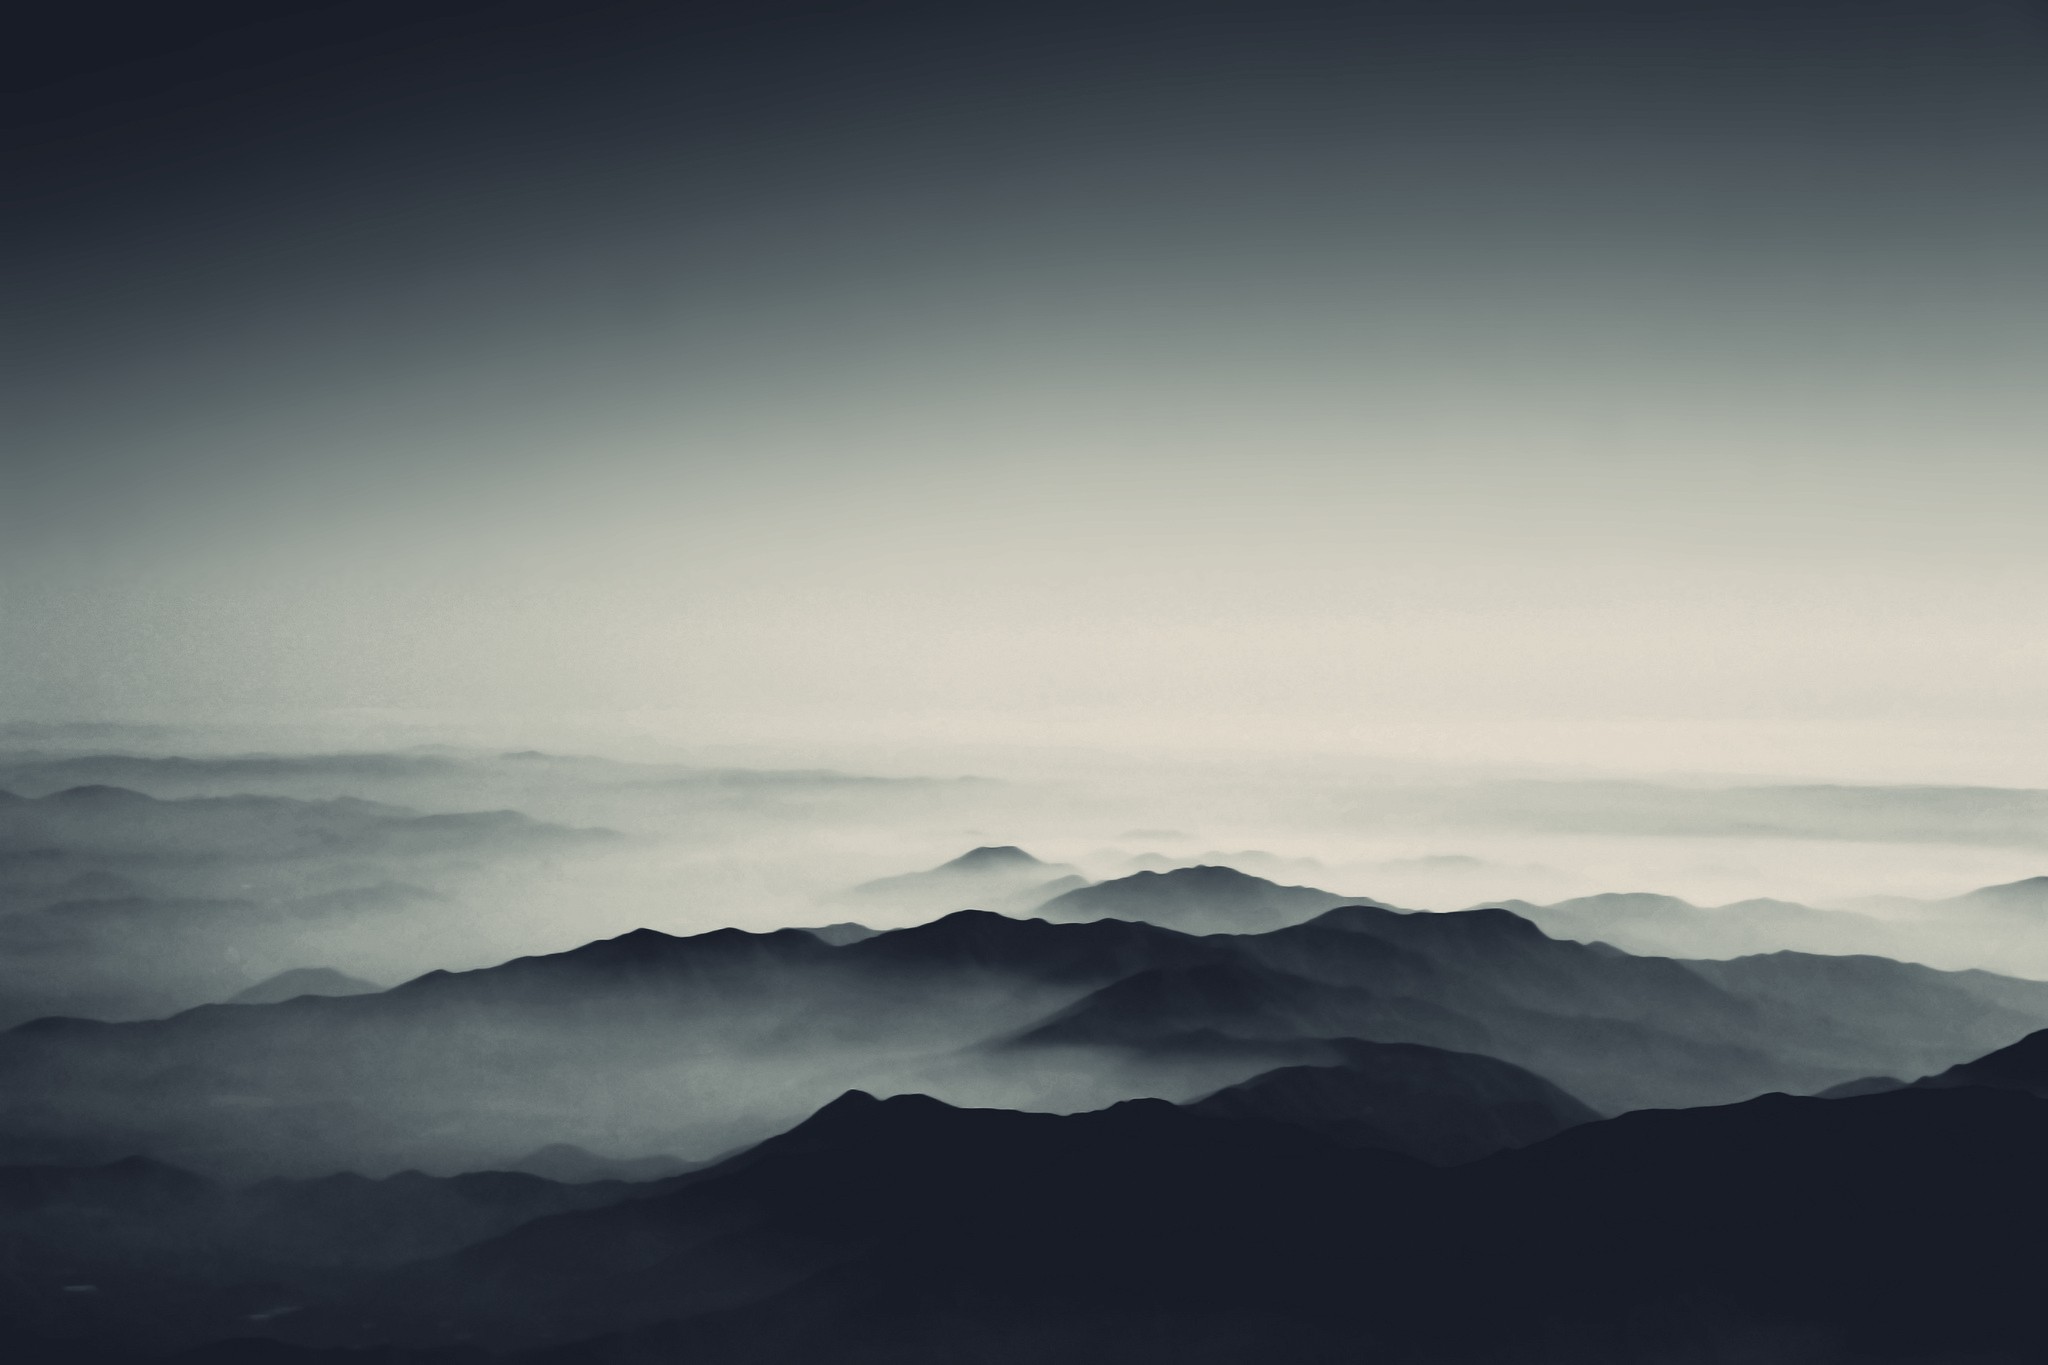 General 2048x1365 photography simple background nature mist mountains silhouette